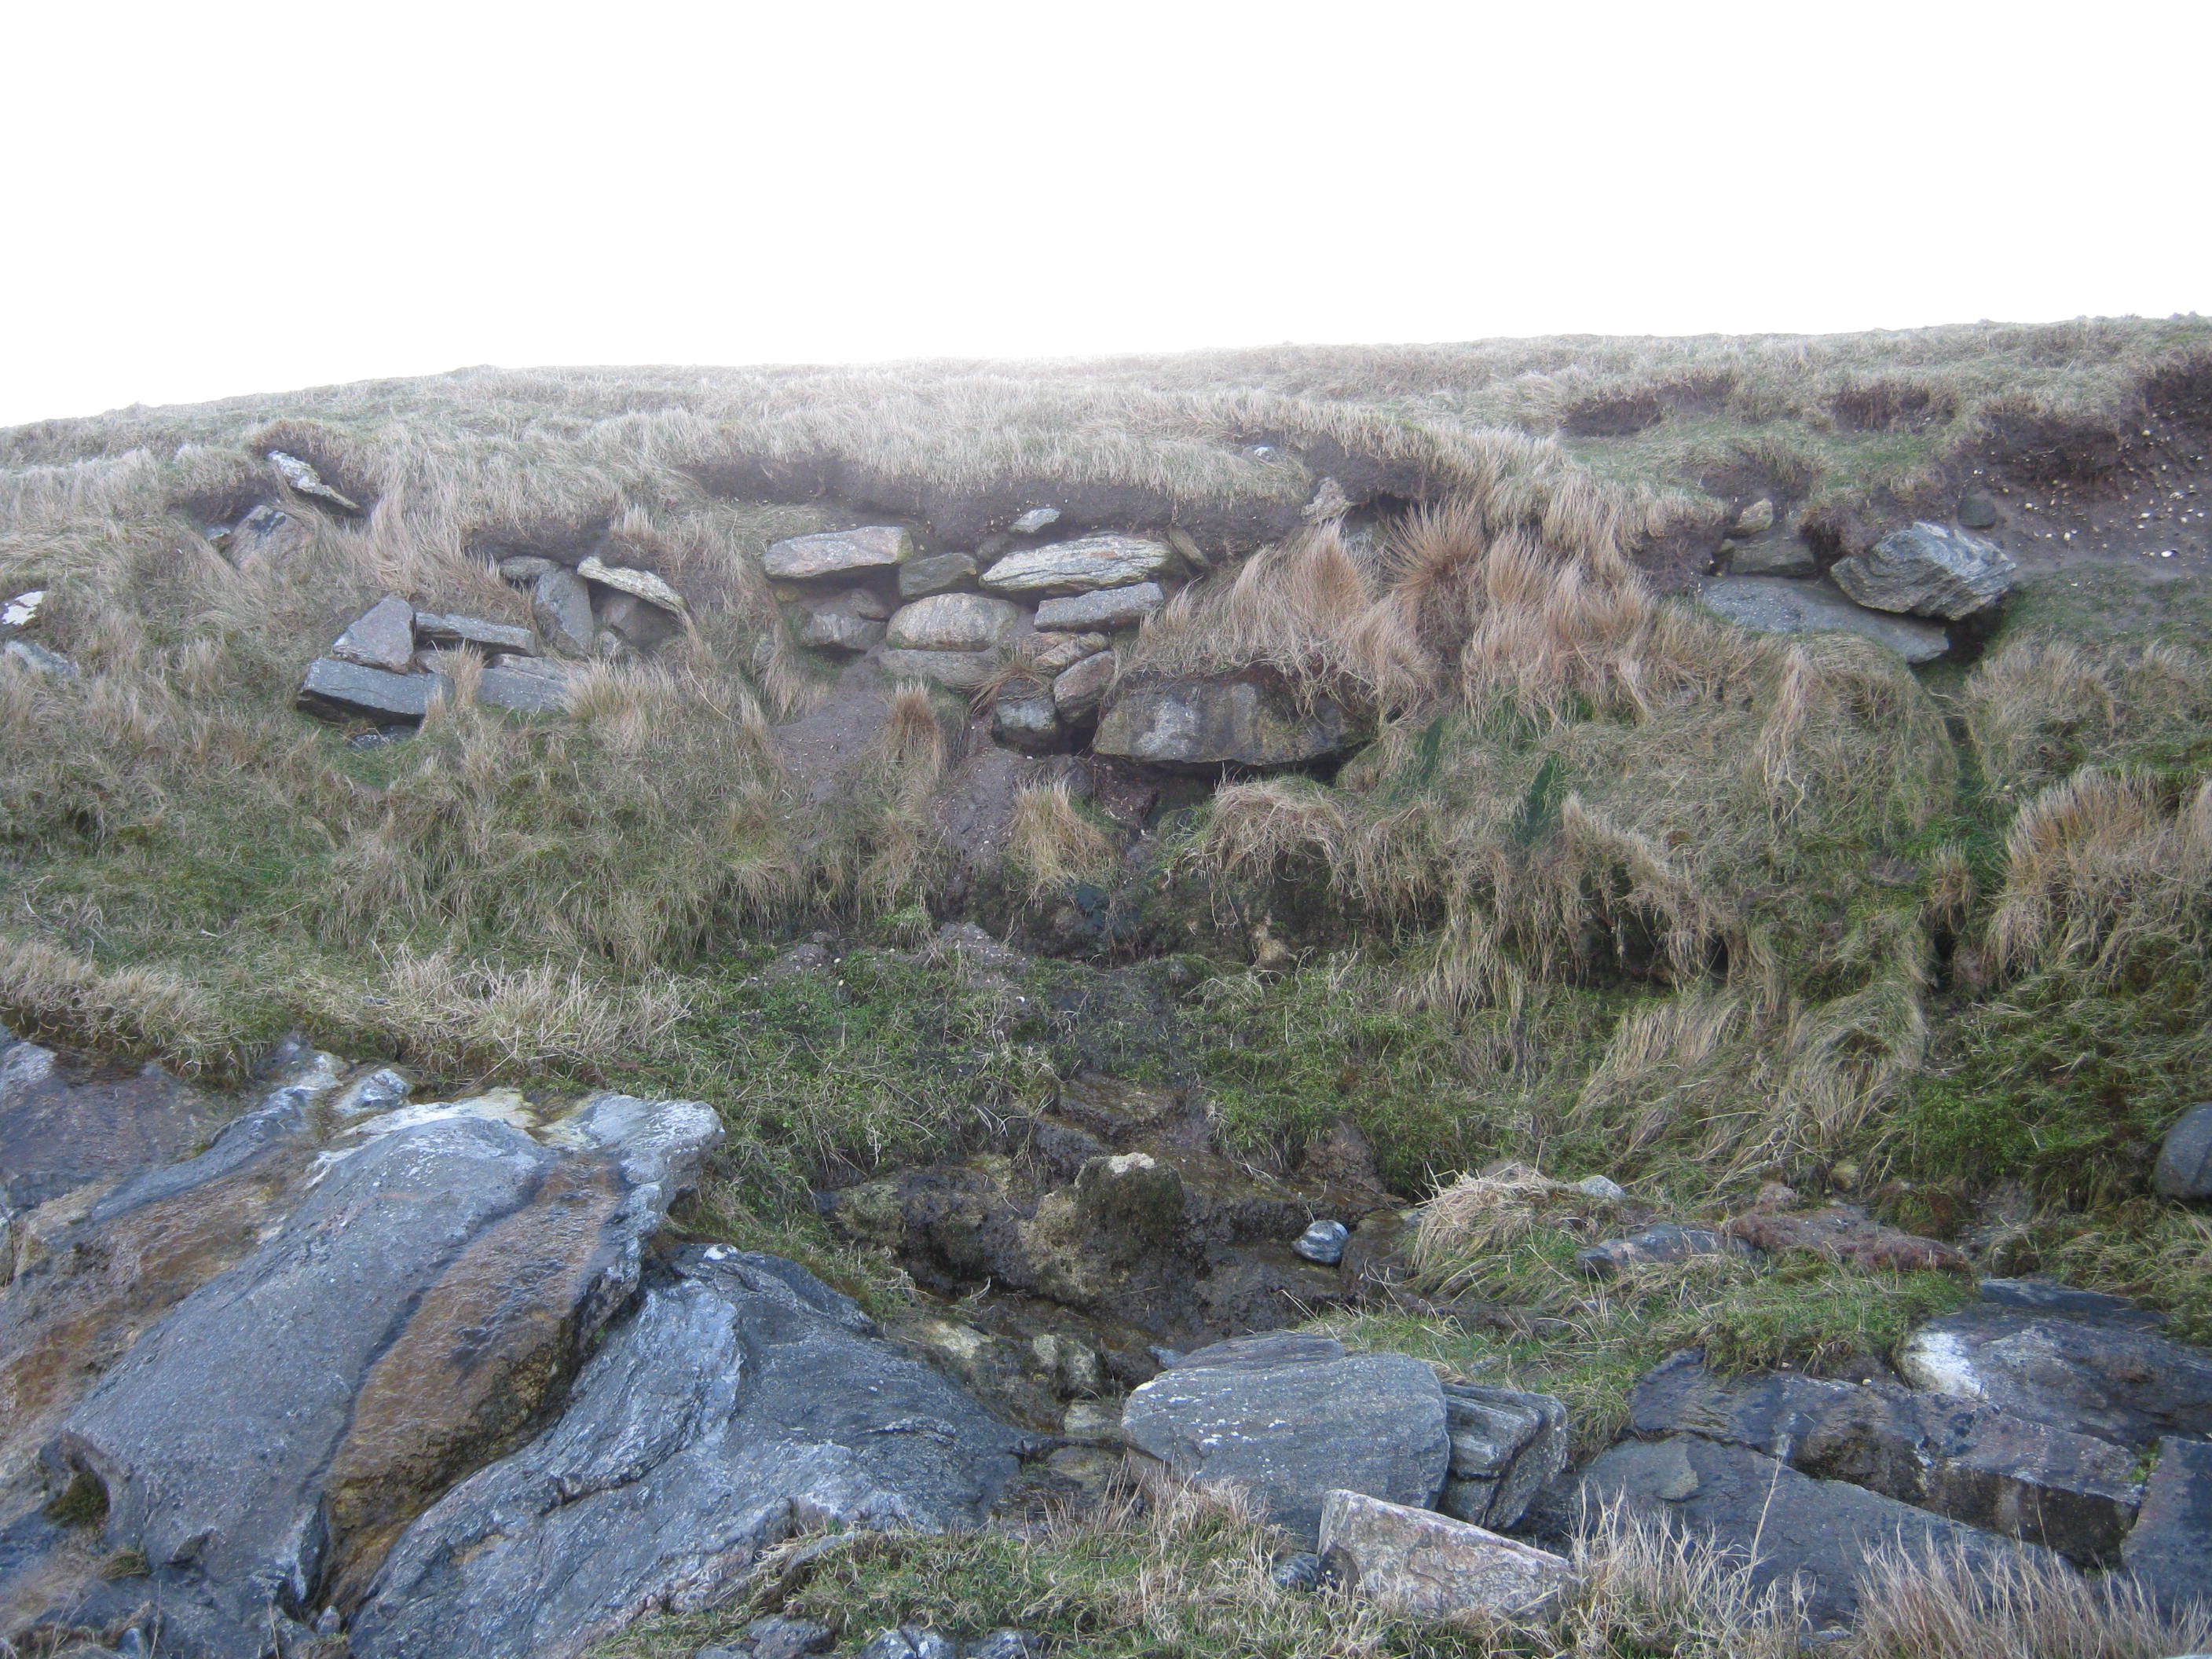 Bostadh stones in section